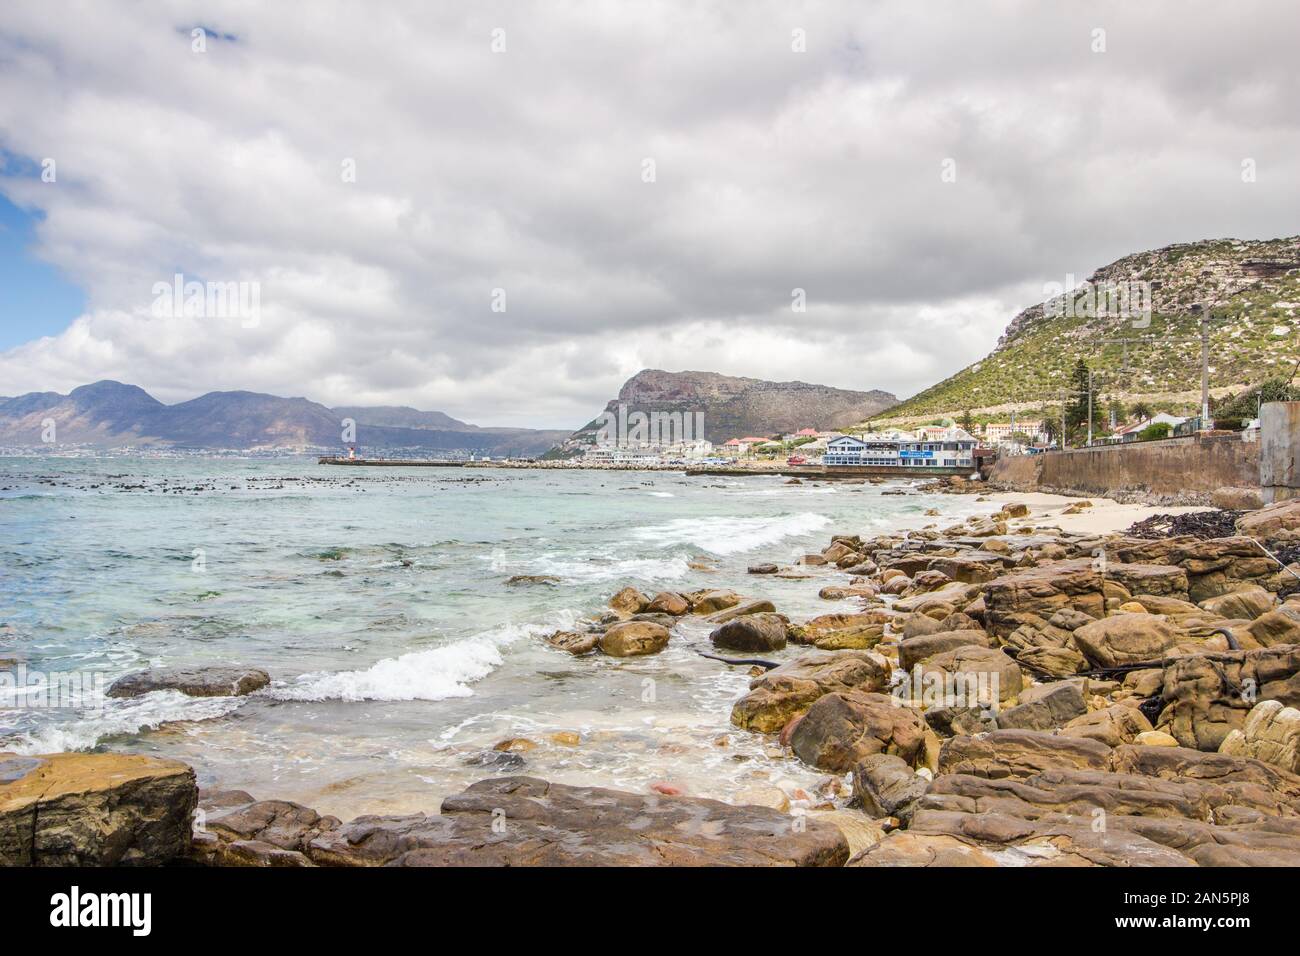 CAPE TOWN , SOUTH AFRICA - 03 JANUARY 2019: View from St James beach over Kalk Bay harbour in |False Bay, Cape Town South Africa Stock Photo